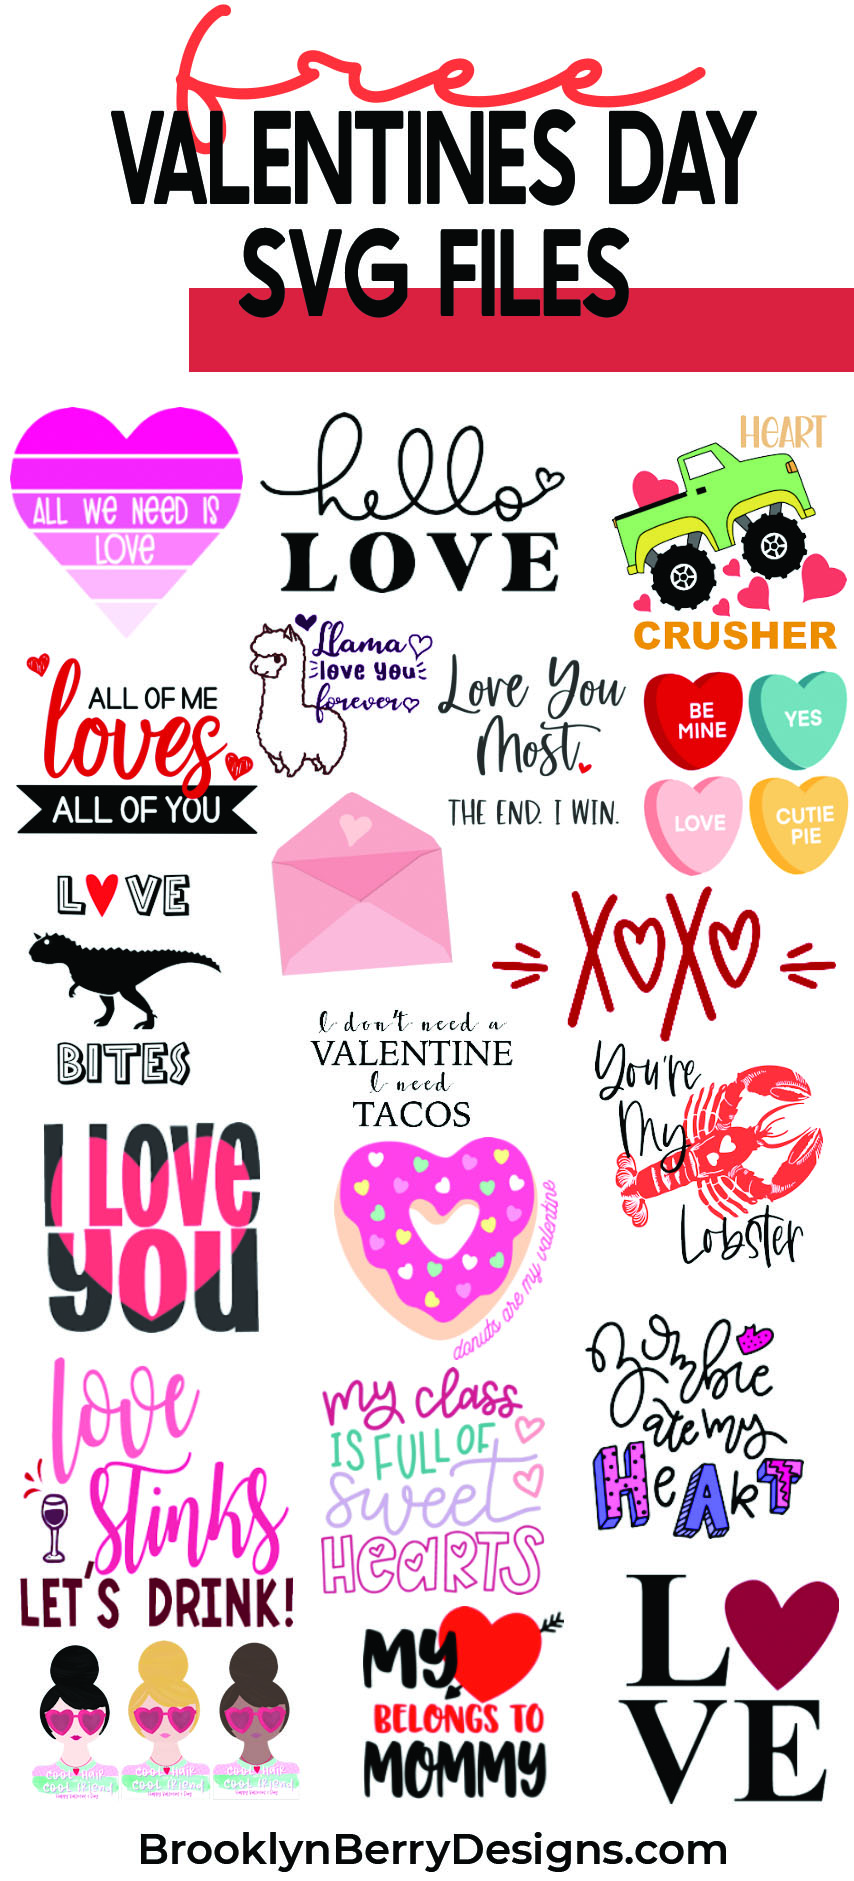 Collage image of various valentines themed svg files to use with a cricut, silhouette, or other craft machines.